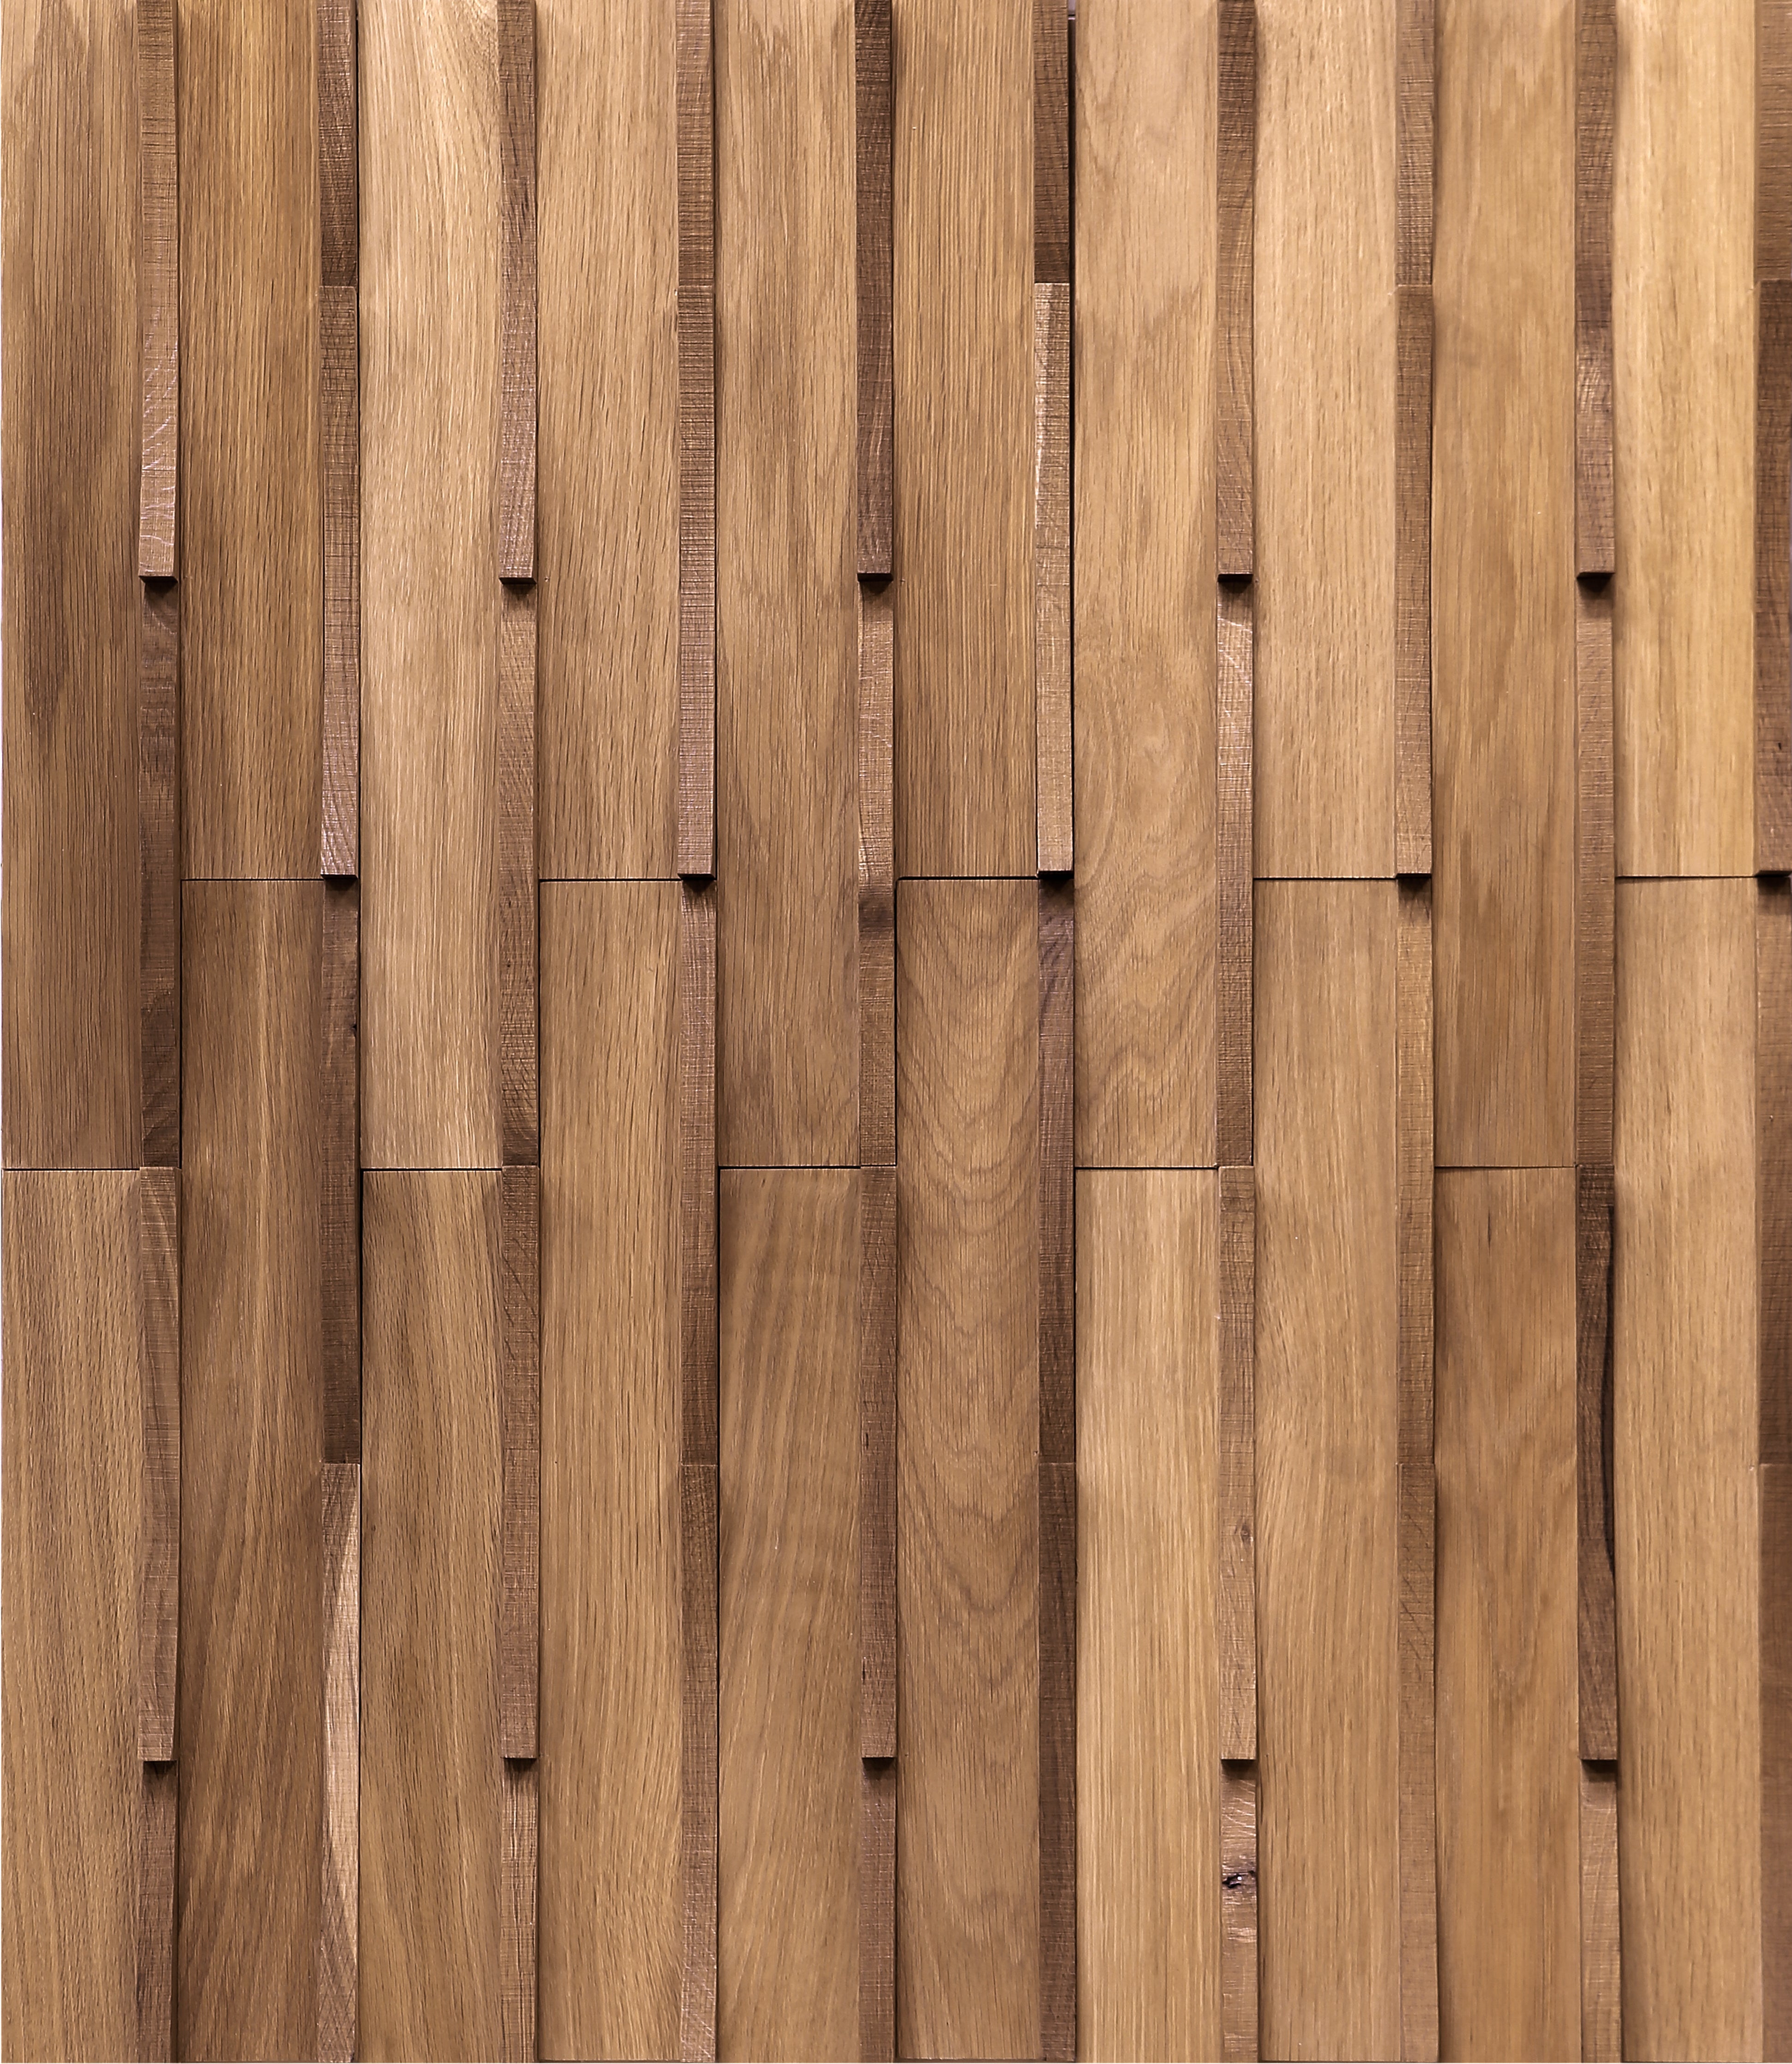 duchateau inceptiv infuse olde dutch oak three dimensional wall natural wood panel lacquer for interior use distributed by surface group international